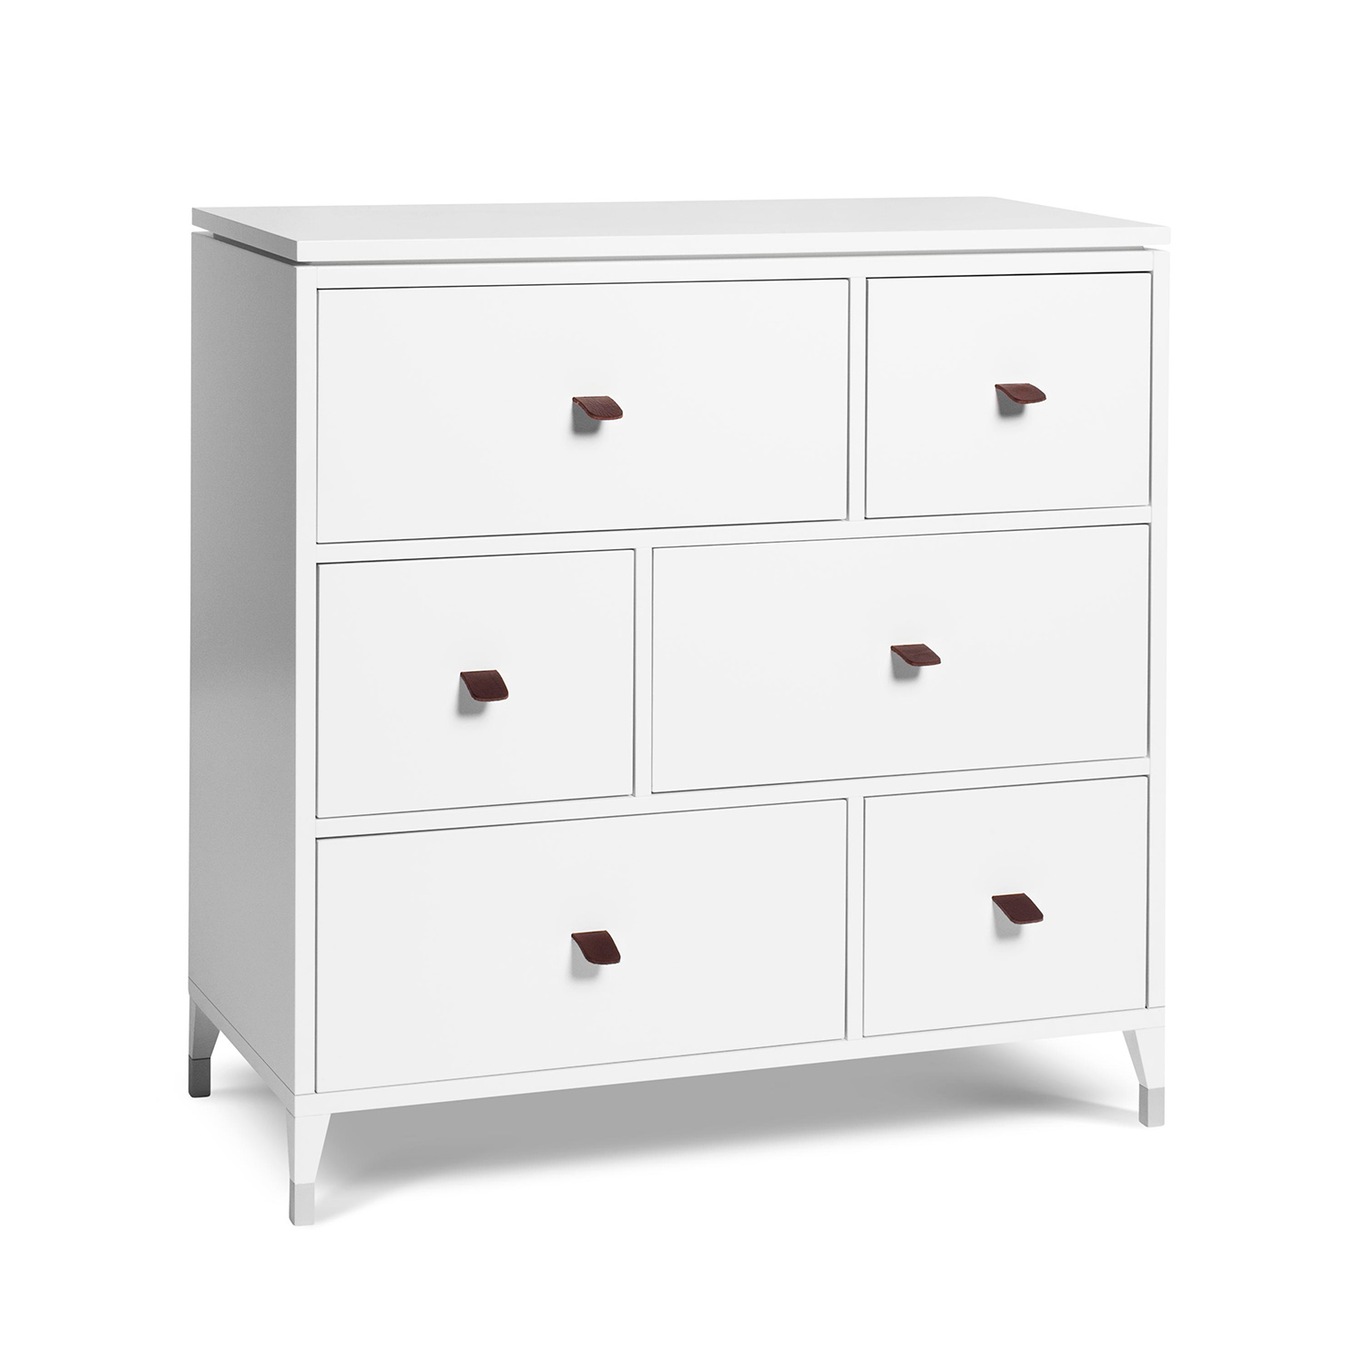 Abisko Chest Of Drawers, 6 Drawers, White Lacquer